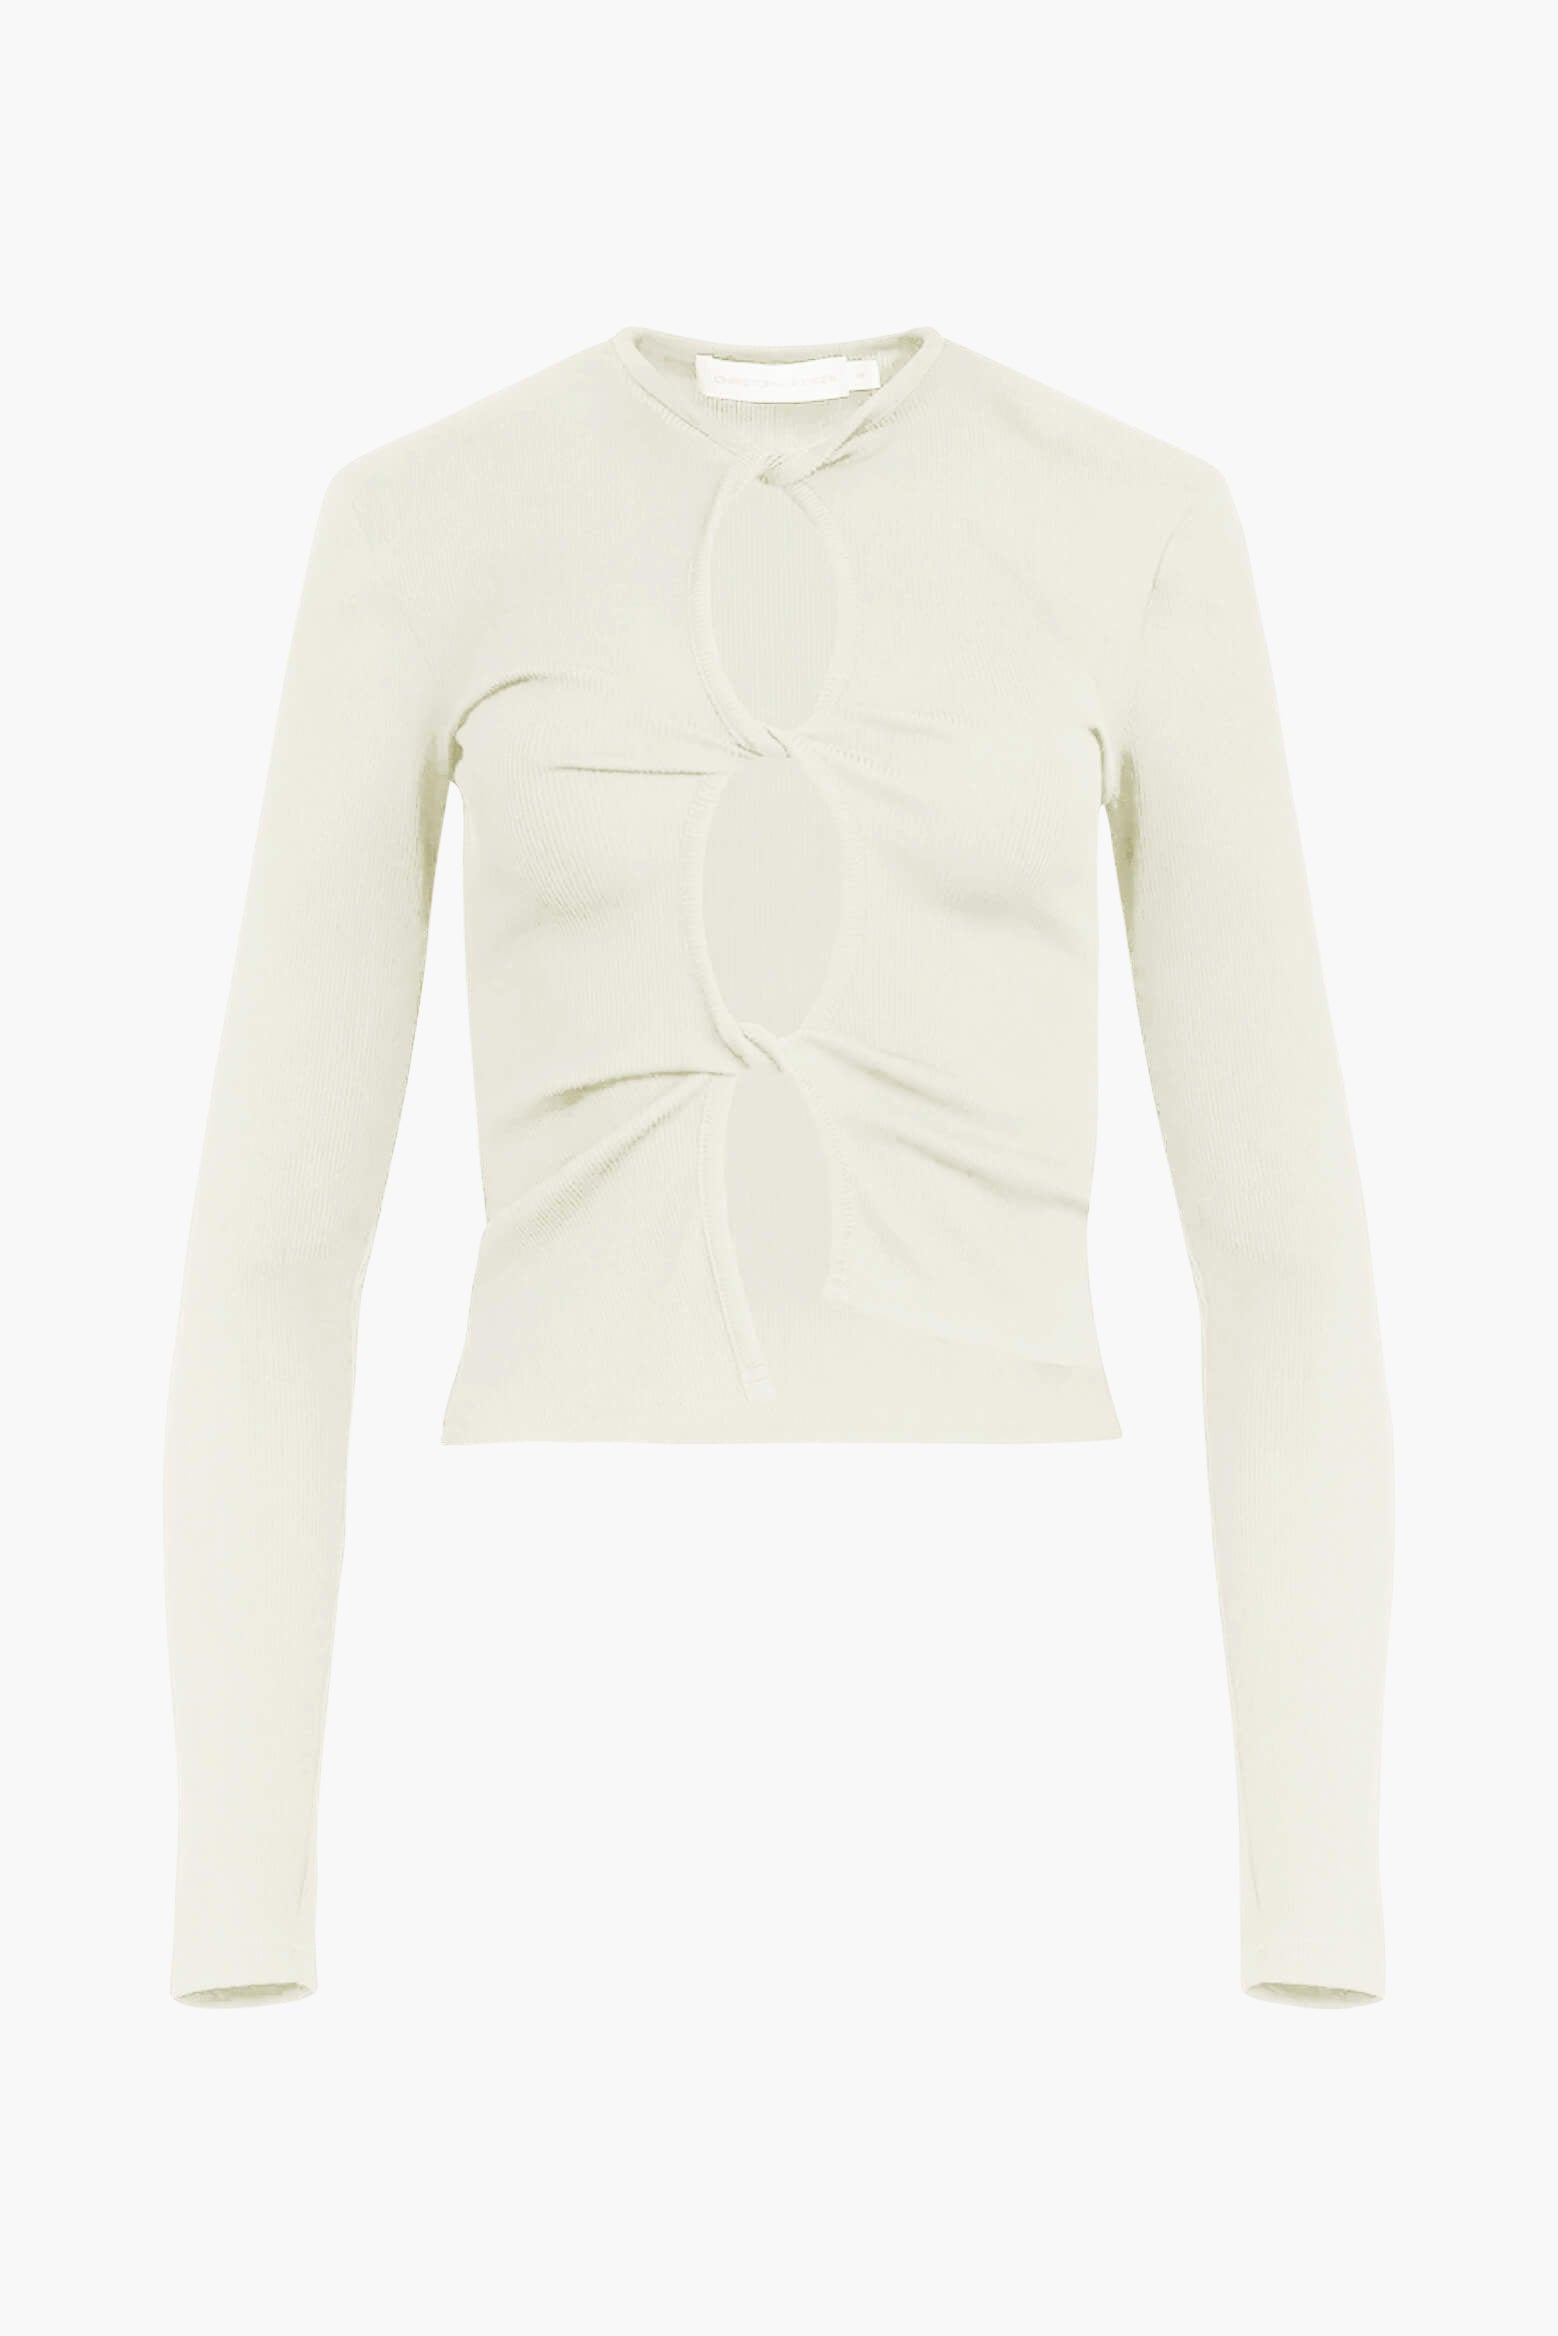 Christopher Esber Open Twist Long Sleeve Top in Snow available at The New Trend